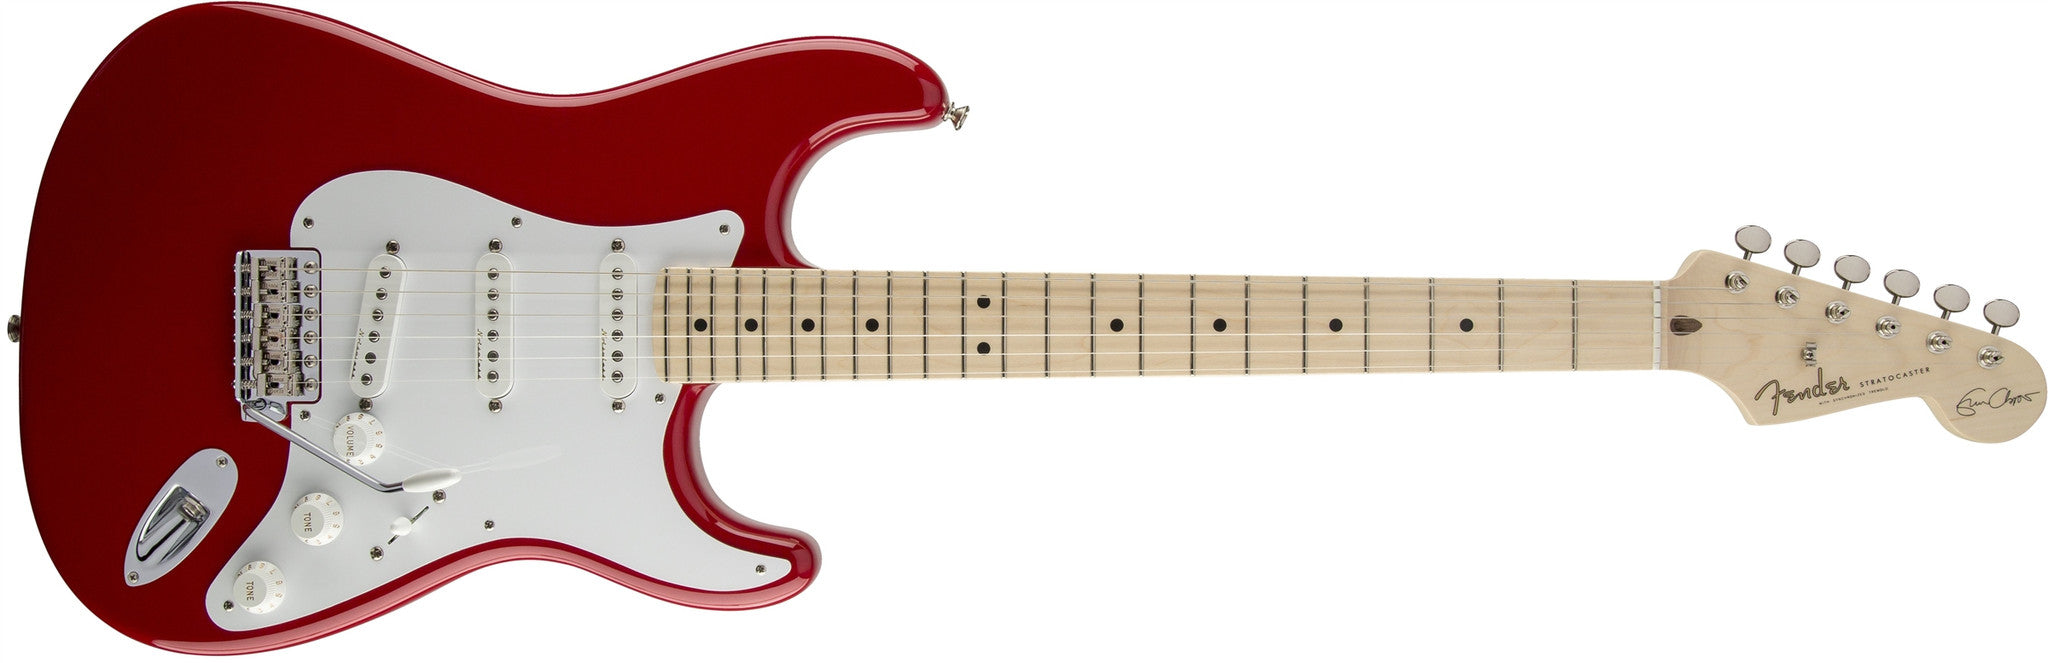 Fender Eric Stratocaster, Maple Fingerboard, Torino Red 011760 L.A. Music